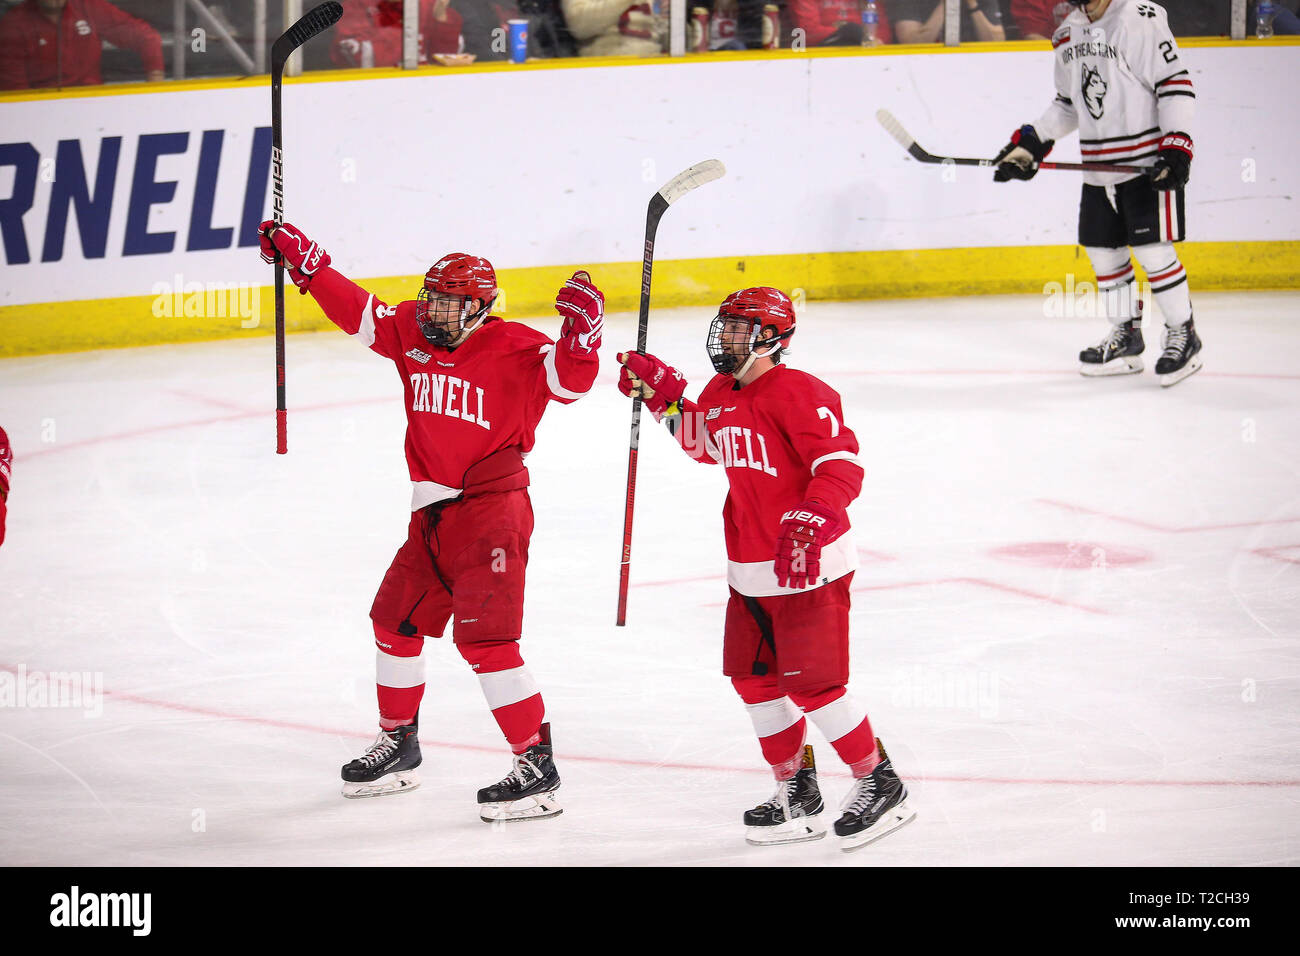 Providence, RI, USA. 30th Mar, 2019. Cornell Big Red forward Brenden Locke (28) and teammate Cam Donaldson (7) celebrate their teams goal during the NCAA East Regional hockey game between The Cornell Big Red and the Northeastern Huskies at The Dunkin Donuts Center in Providence, RI. Alan Sullivan/CSM/Alamy Live News Stock Photo